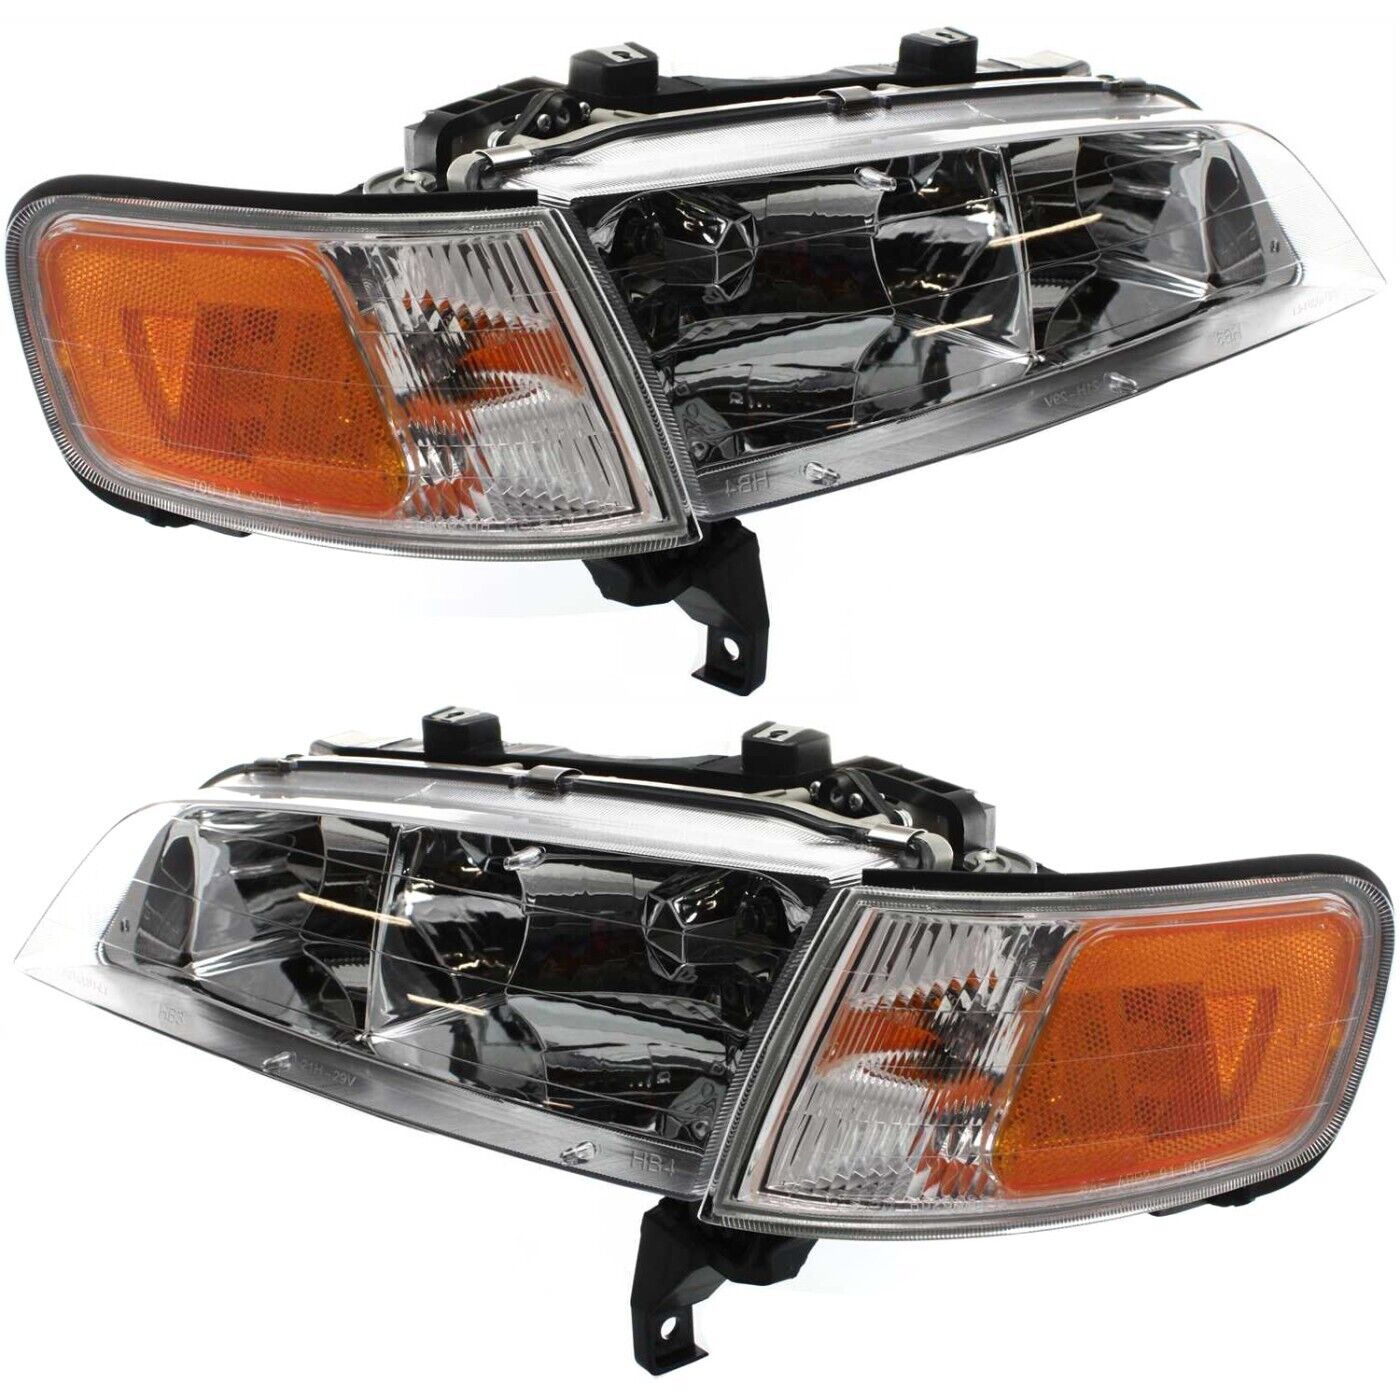 Headlight Assembly Set For 1994-1997 Honda Accord Left Right Halogen With Bulb